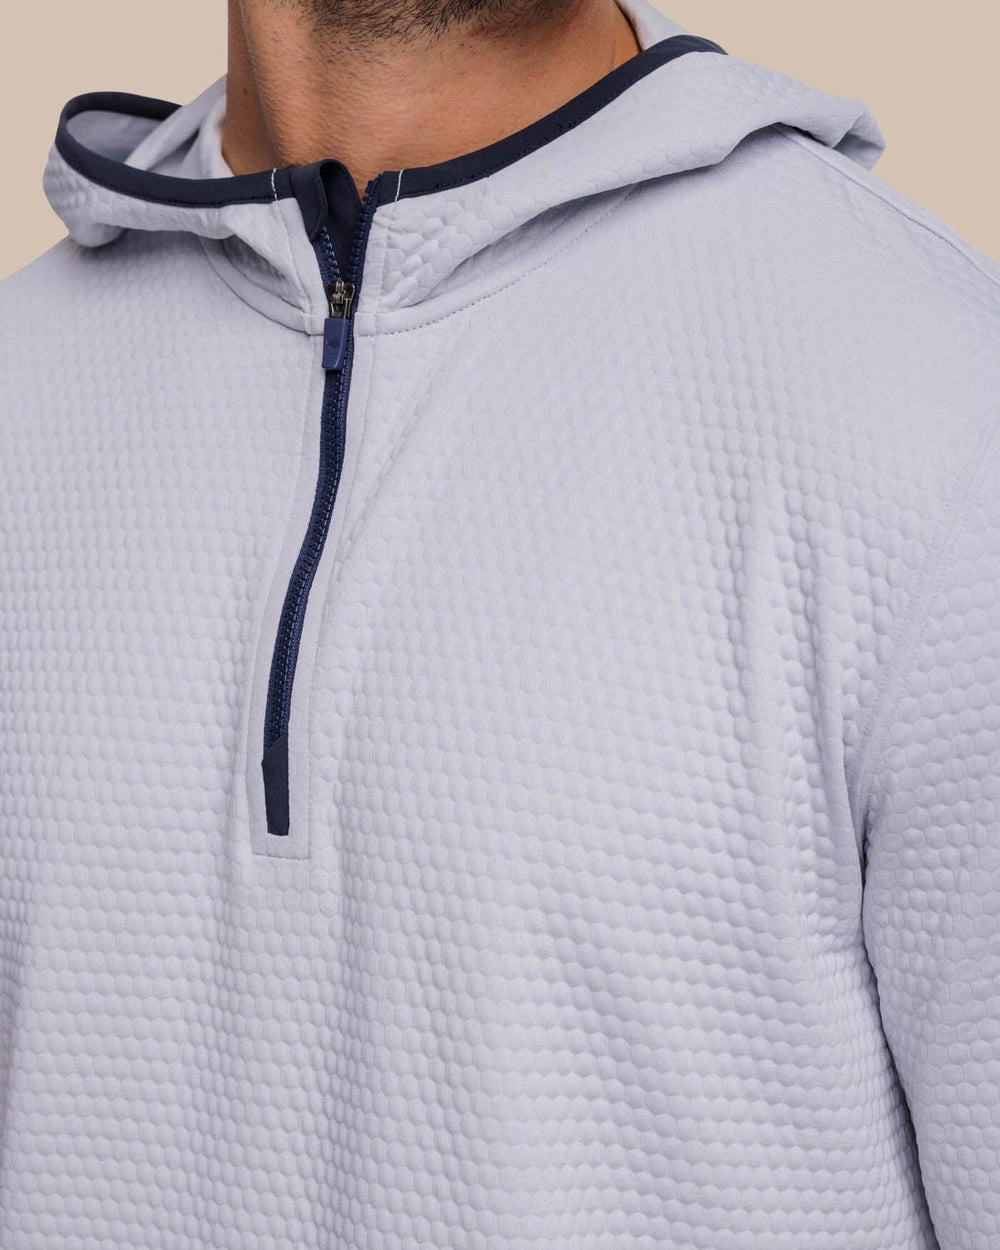 The detail view of the Southern Tide Scuttle Heather Performance Quarter Zip Hoodie by Southern Tide - Heather Slate Grey